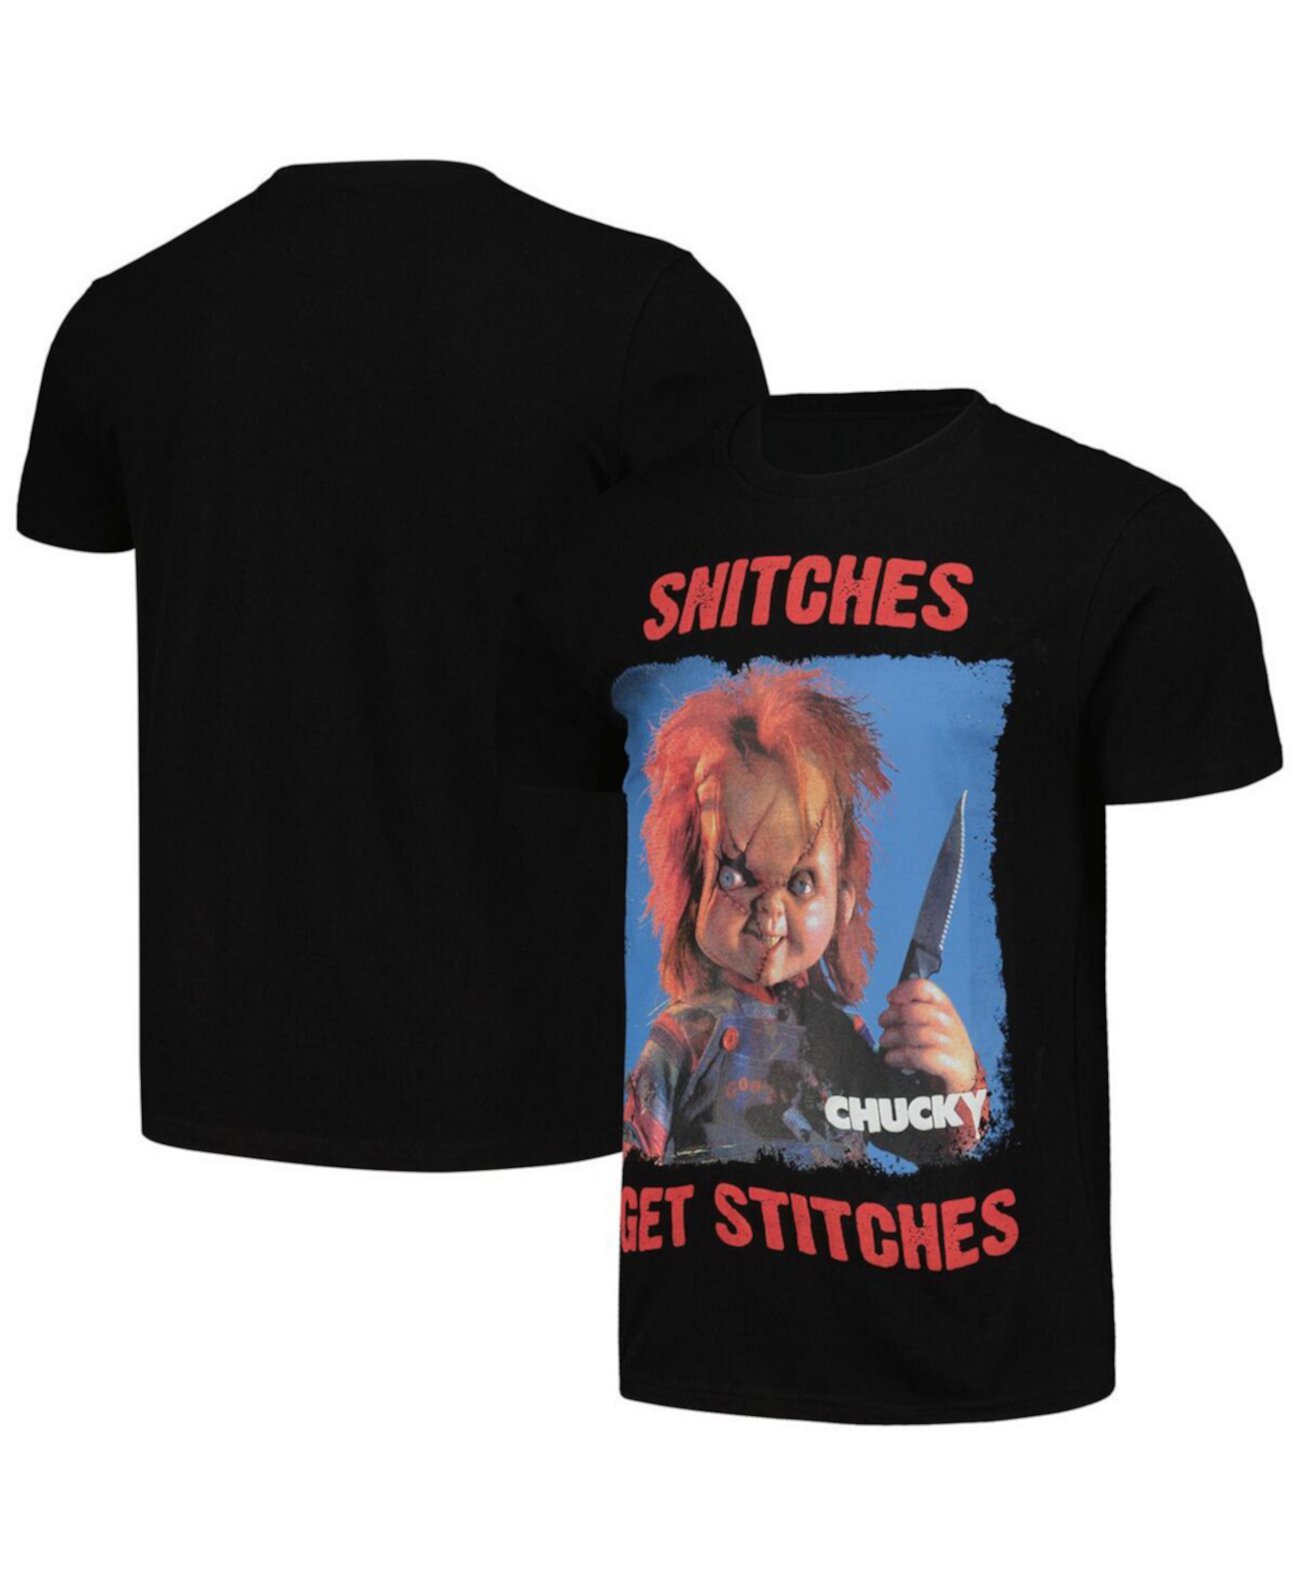 Men's and Women's Black Chucky Snitches Get Stitches T-Shirt Reason